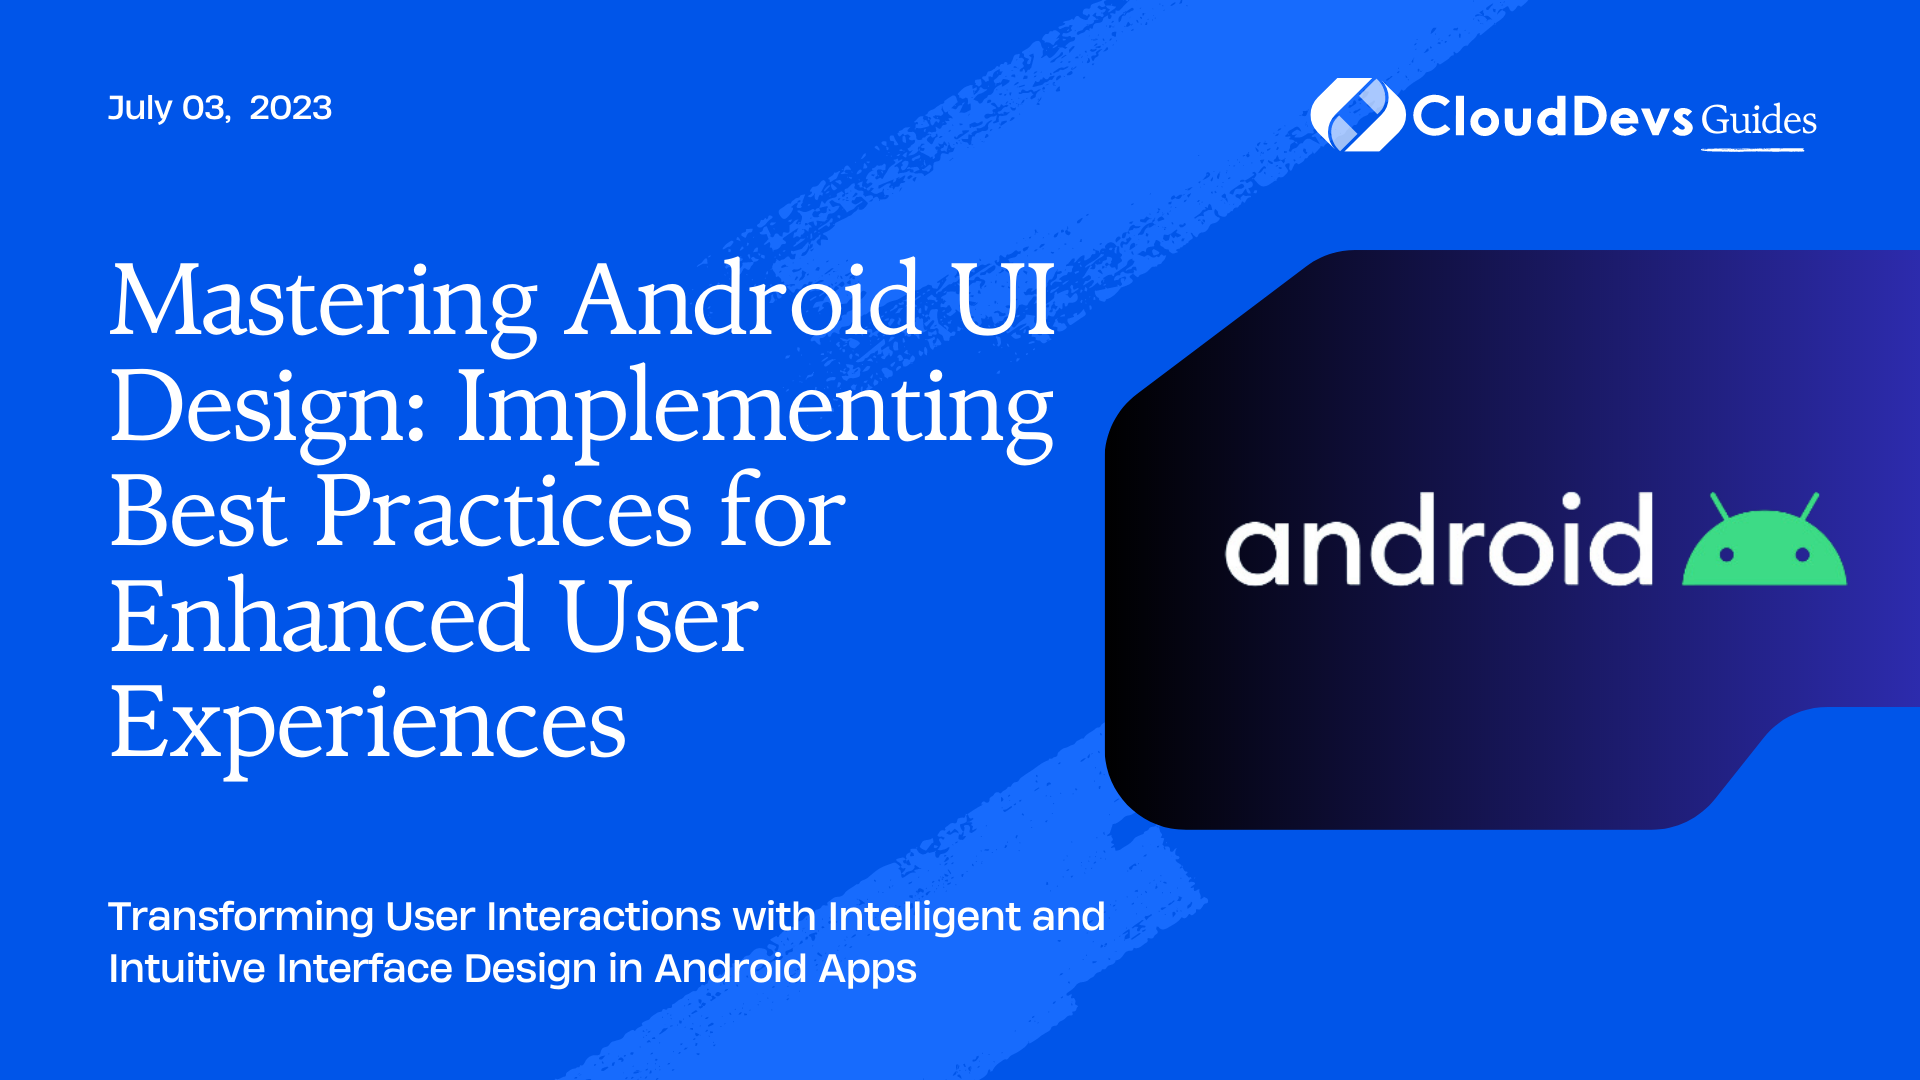 Mastering Android UI Design: Implementing Best Practices for Enhanced User Experiences